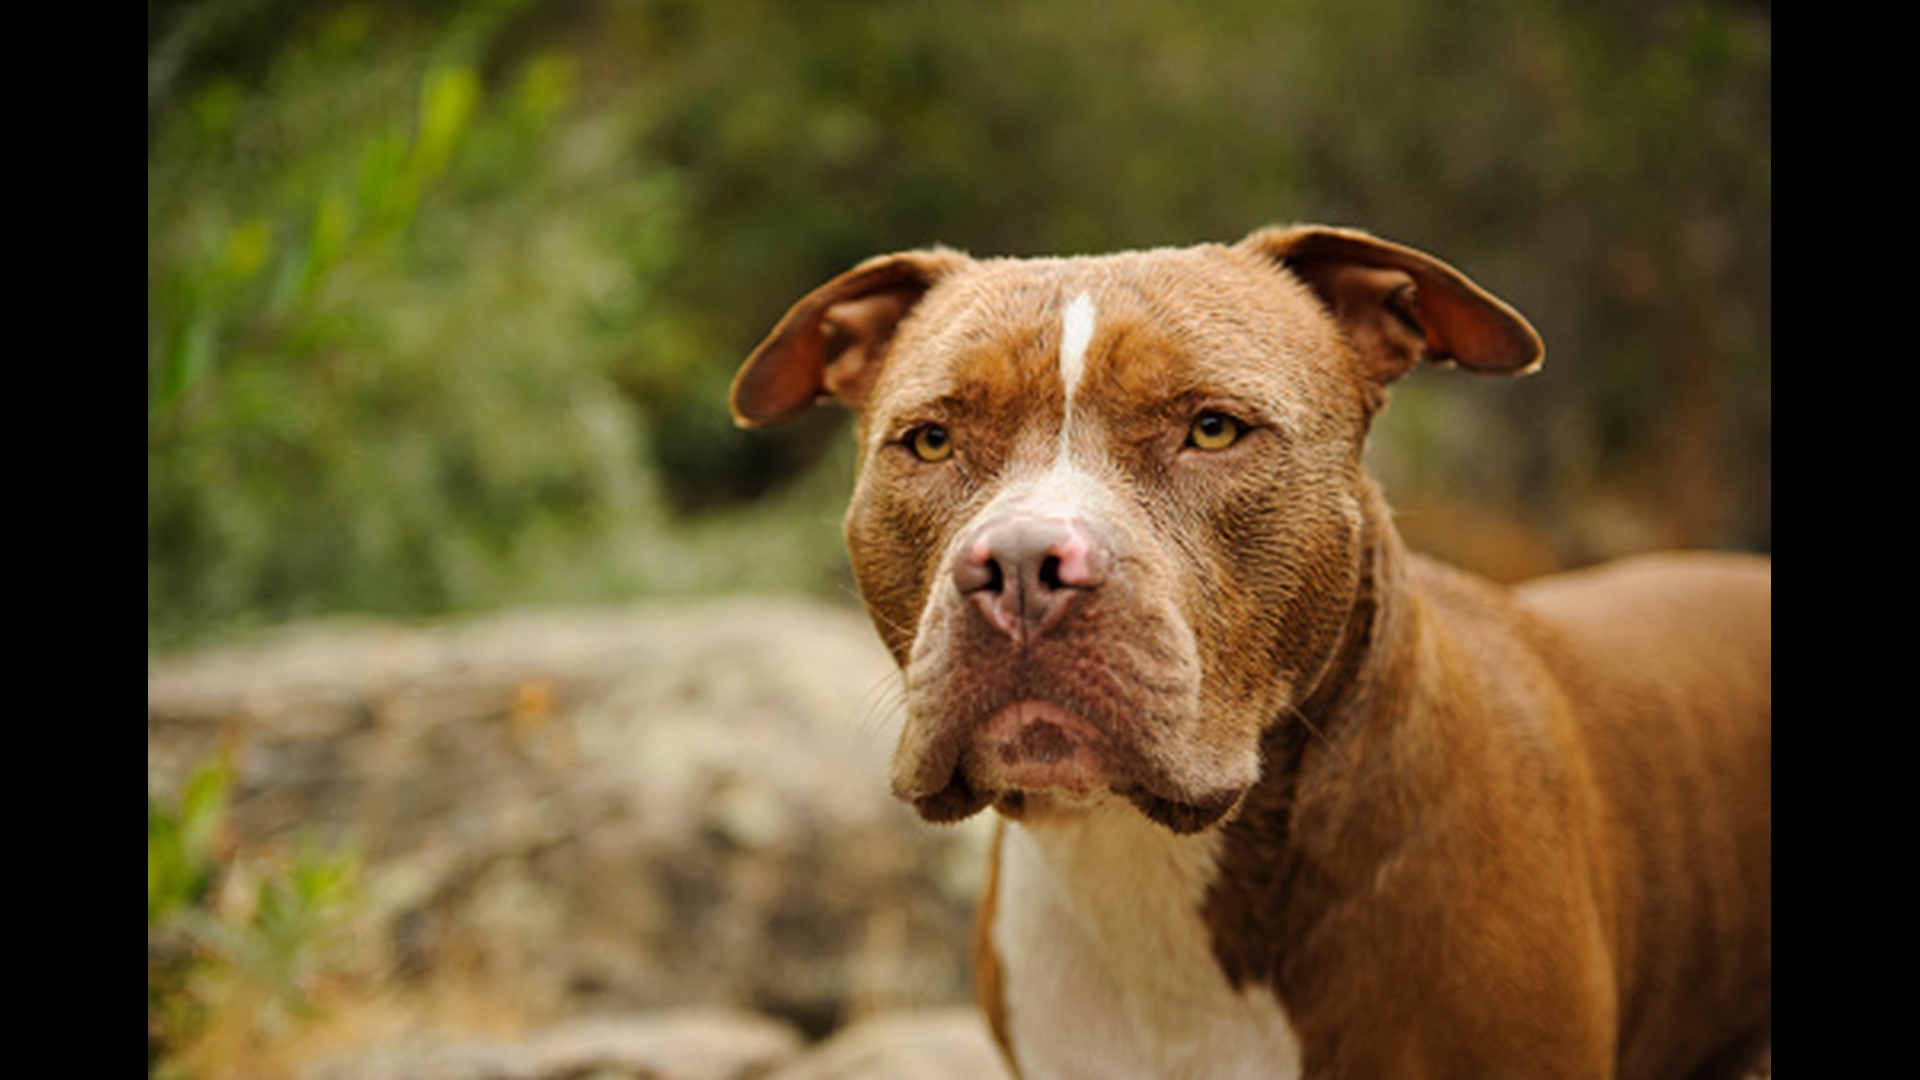 are pit bulls really bad dogs